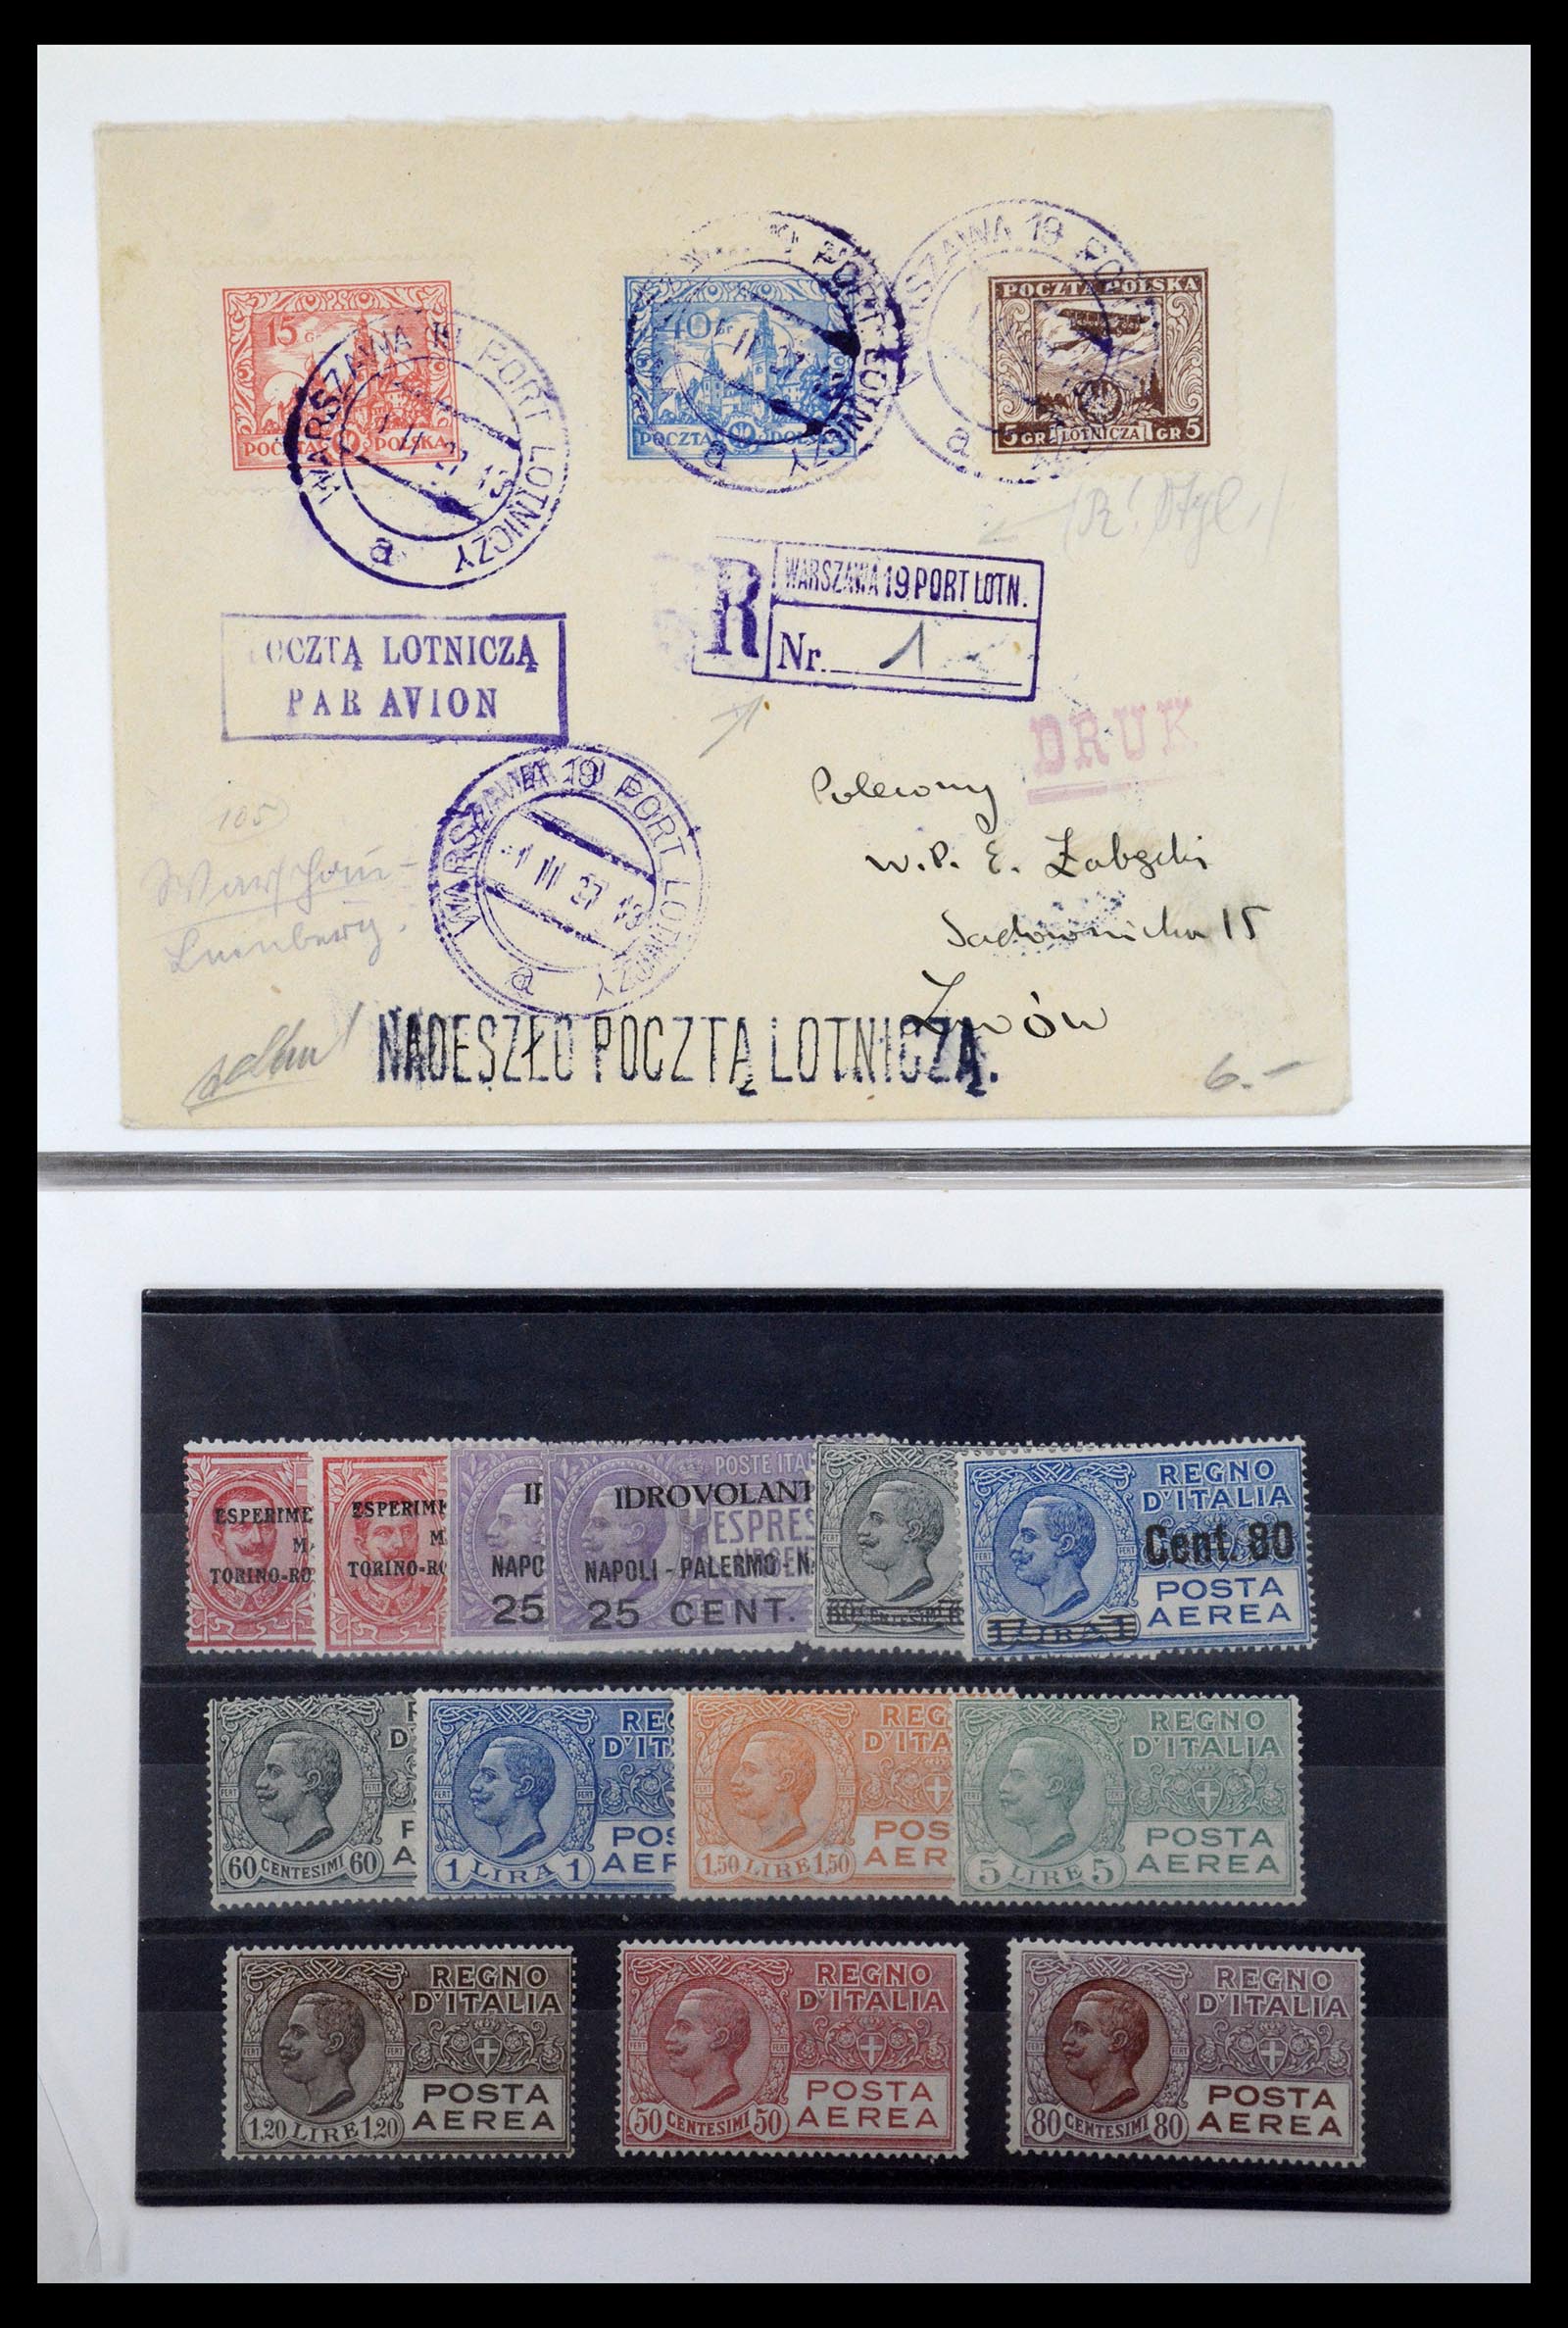 36009 001 - Stamp collection 36009 Airmail stamps and covers 1920-1940.